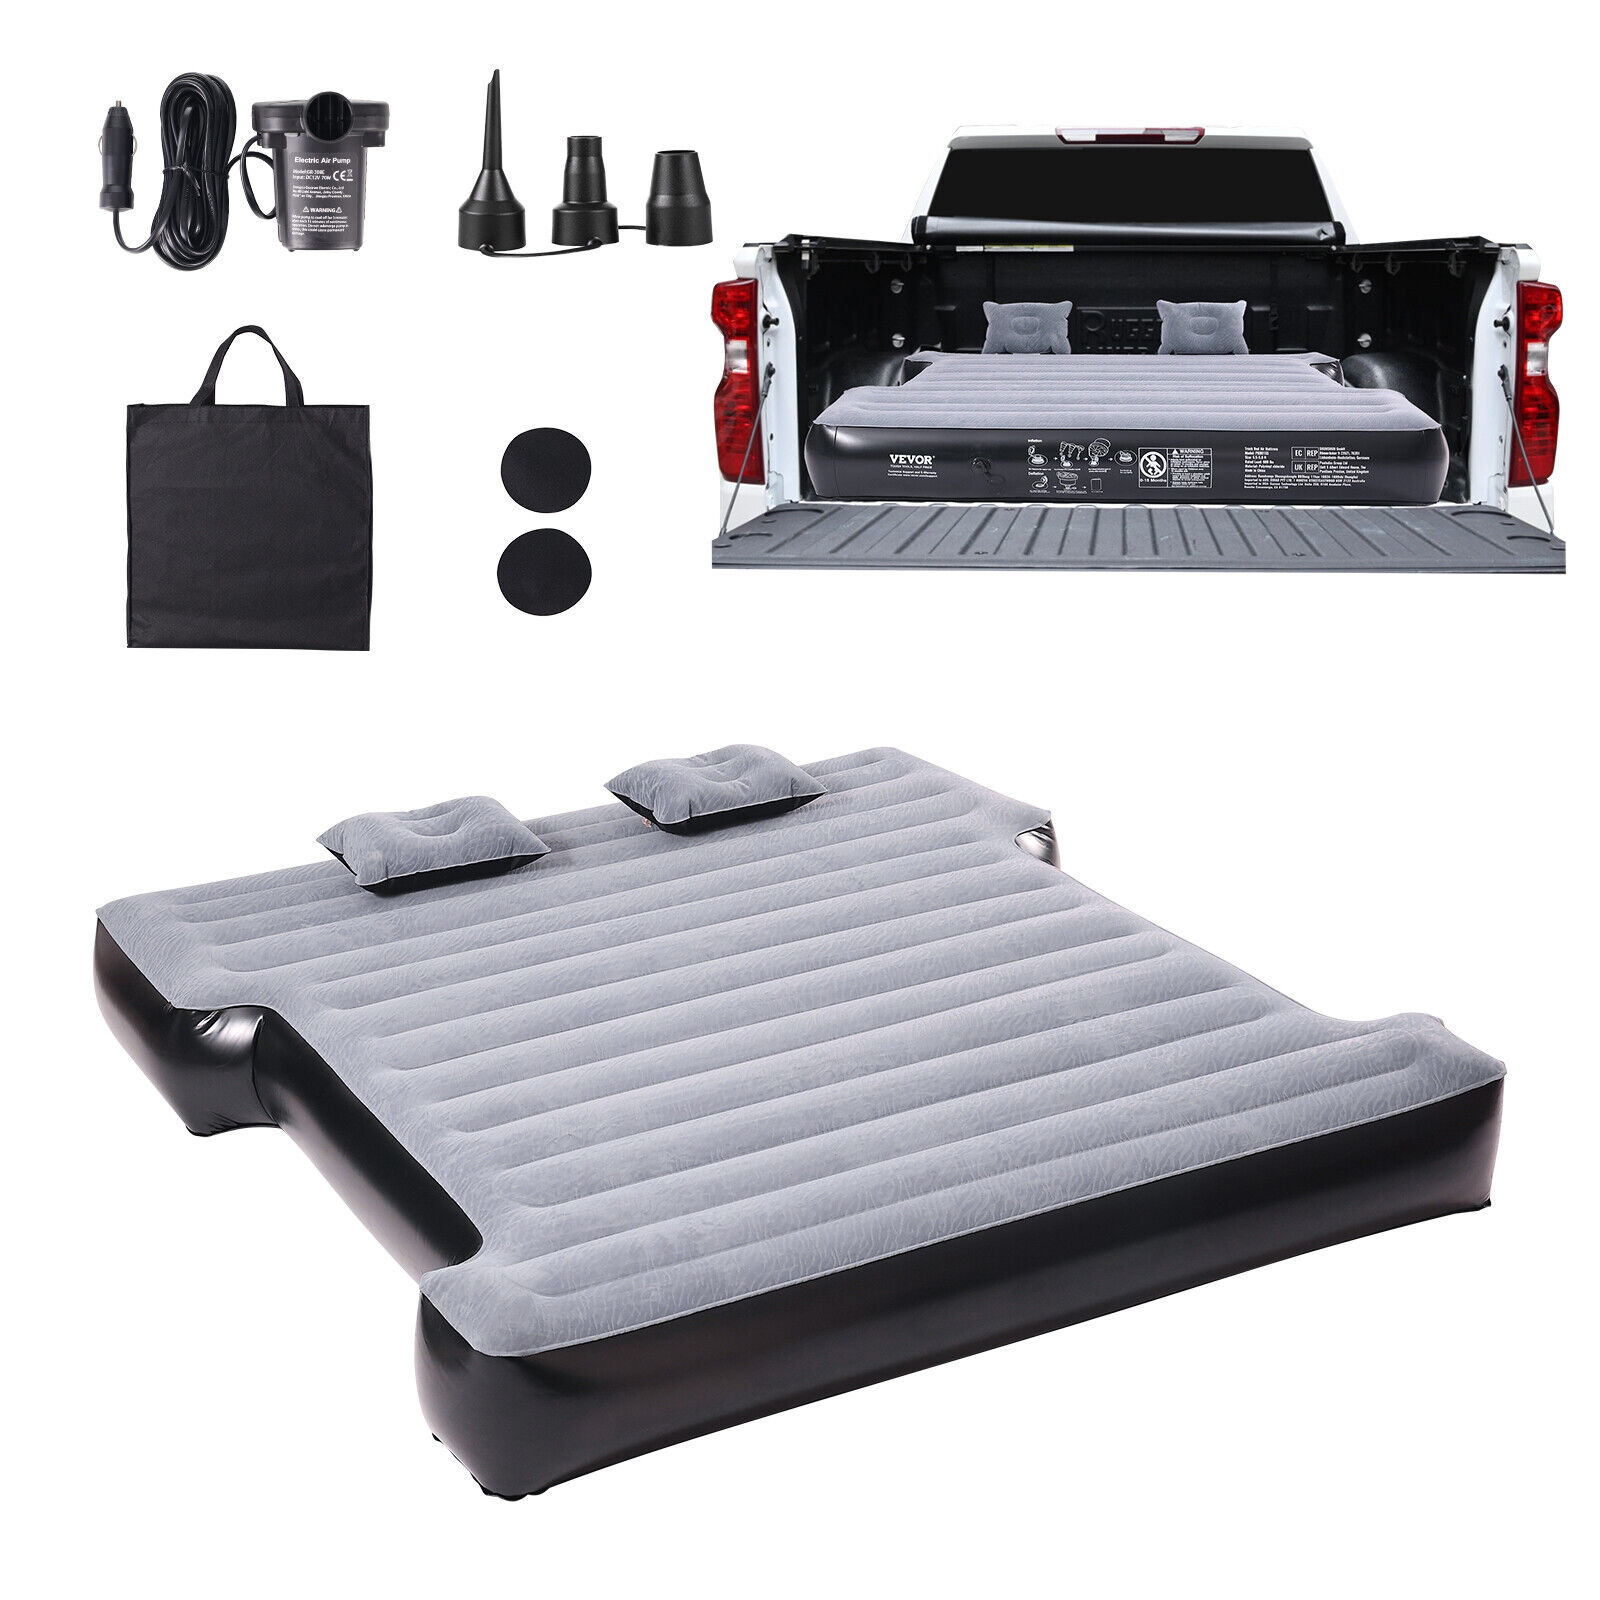 Truck Air Bed Car Mattress 5.5-5.8 ft Full-Size Short Bed Inflatable with Pump